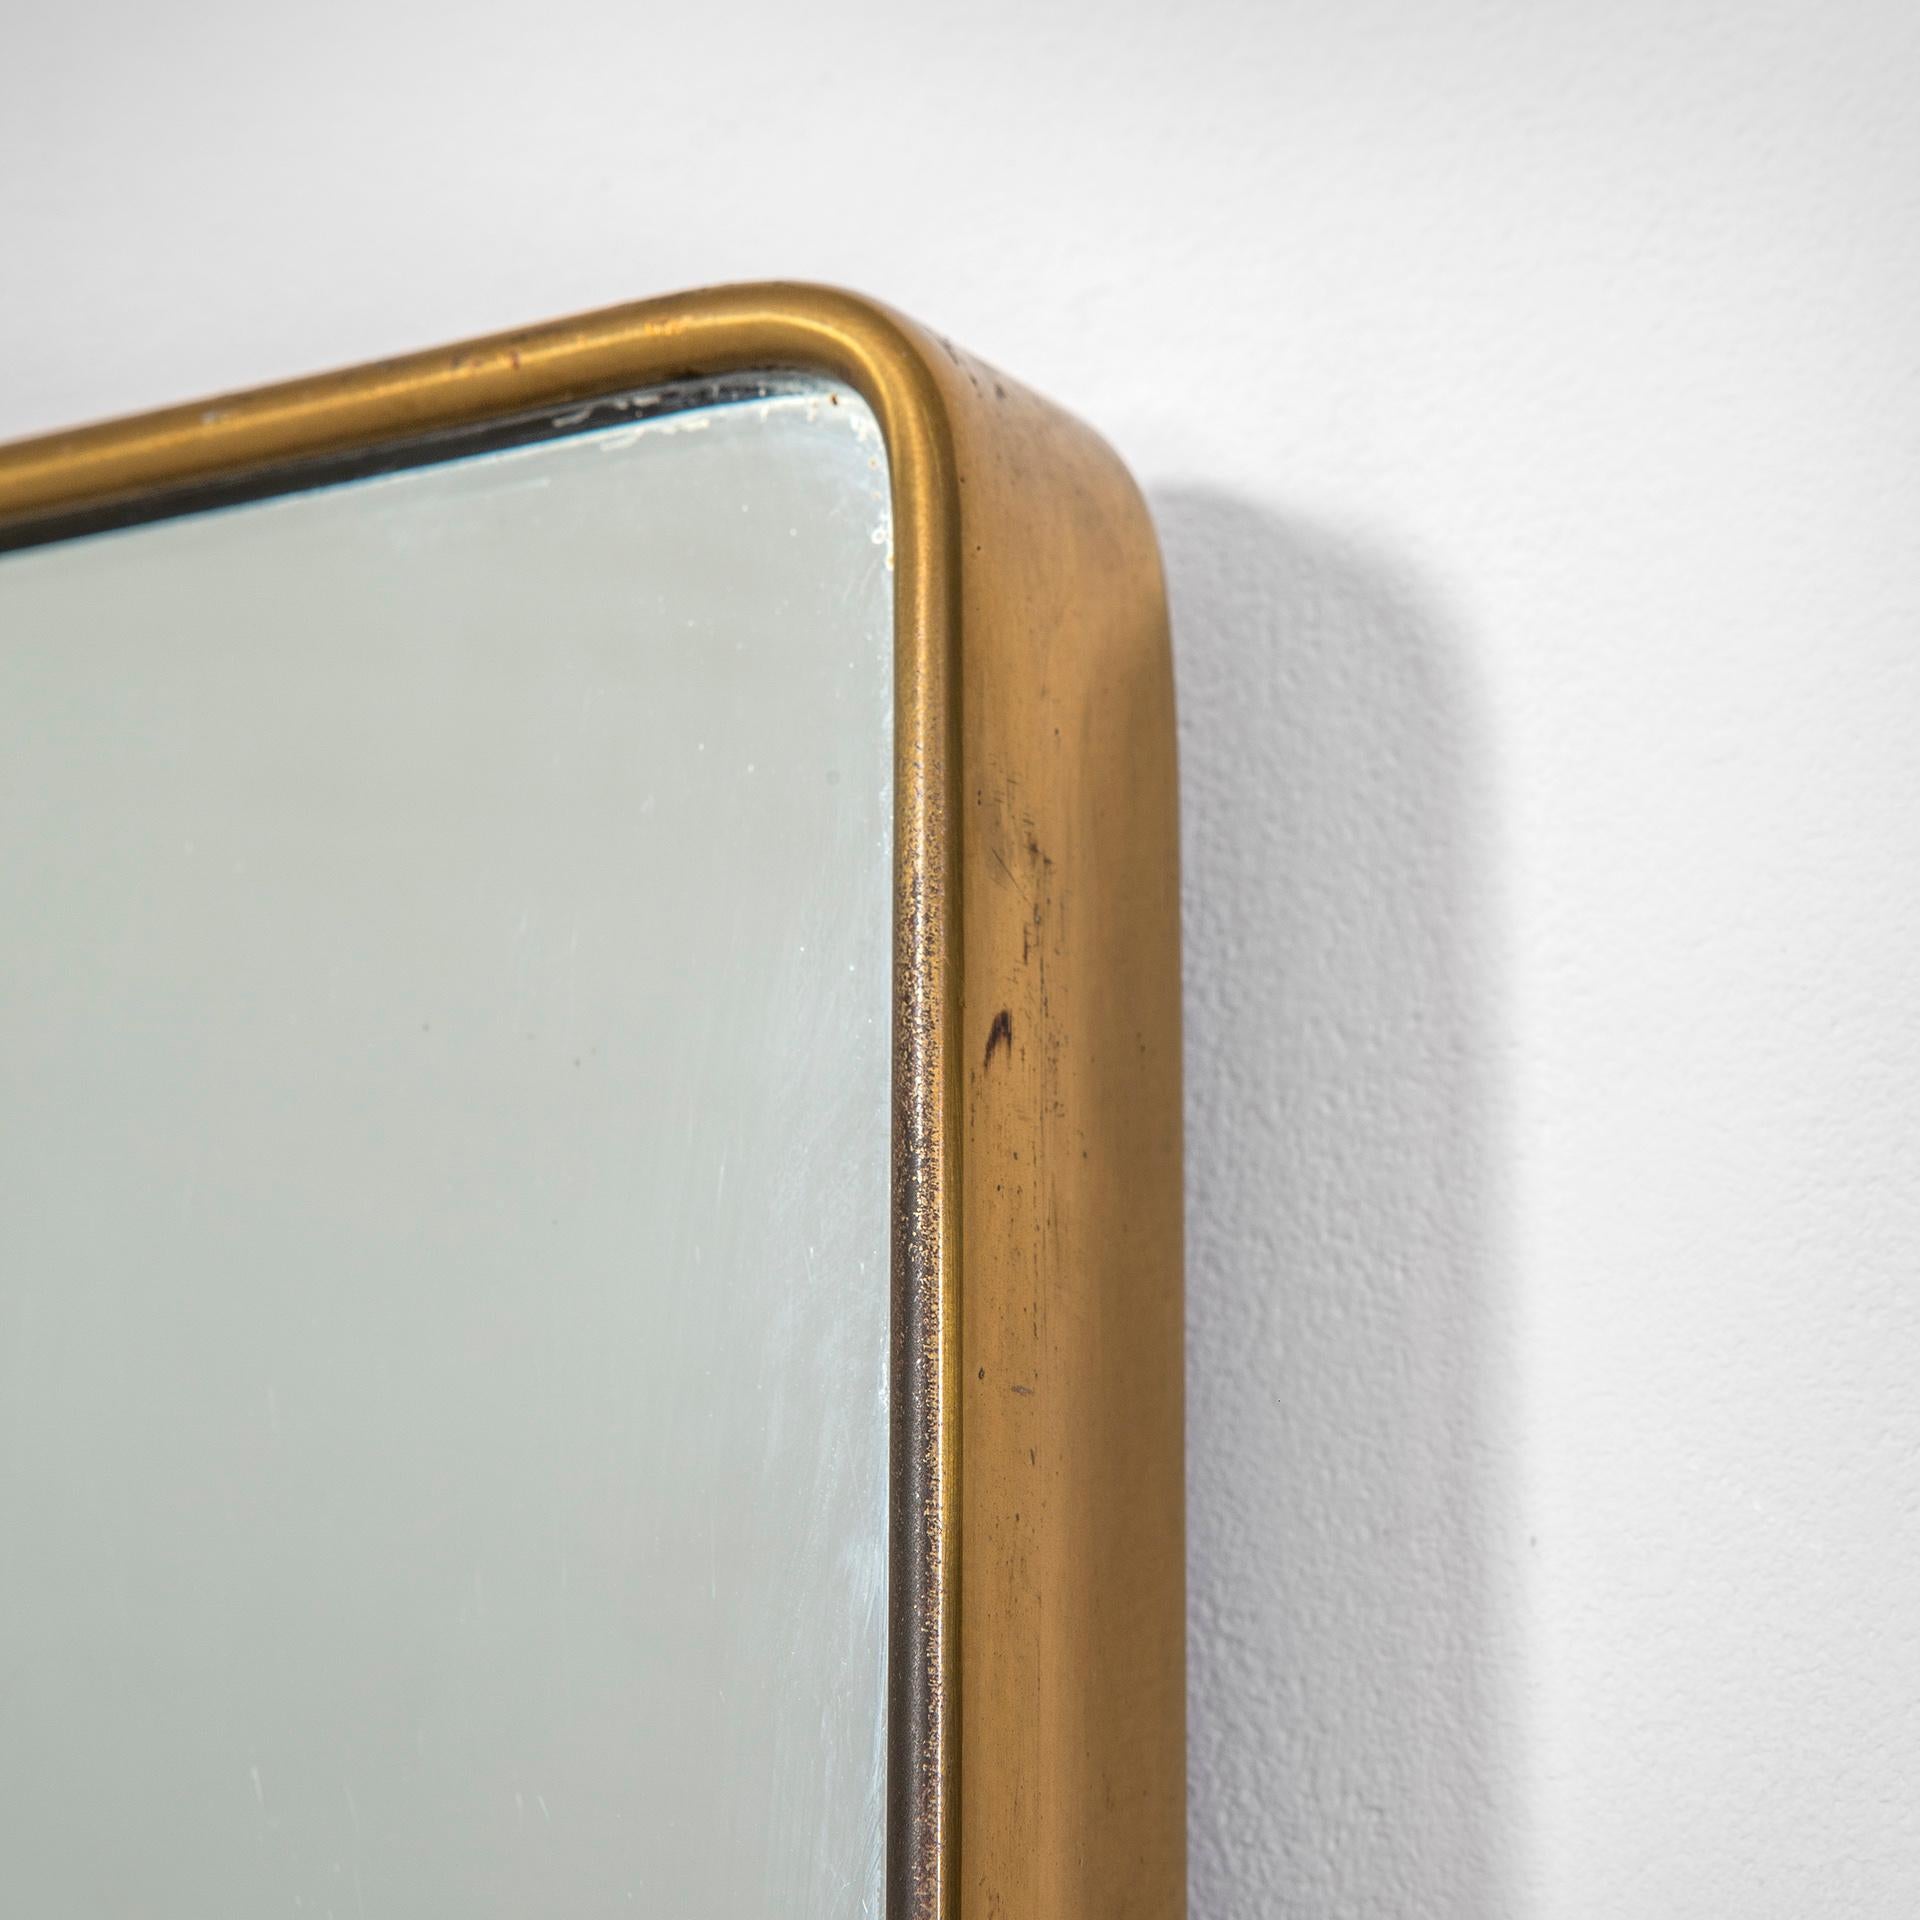 Fontana Arte mirror from the 1950s with brass edge and manufacturer's trademark on the back as “Galvanit Fontana Cantù 1954” . 
This mirror is a must have of the Italian Design, this is an item timelss and fitting always good with all kind of